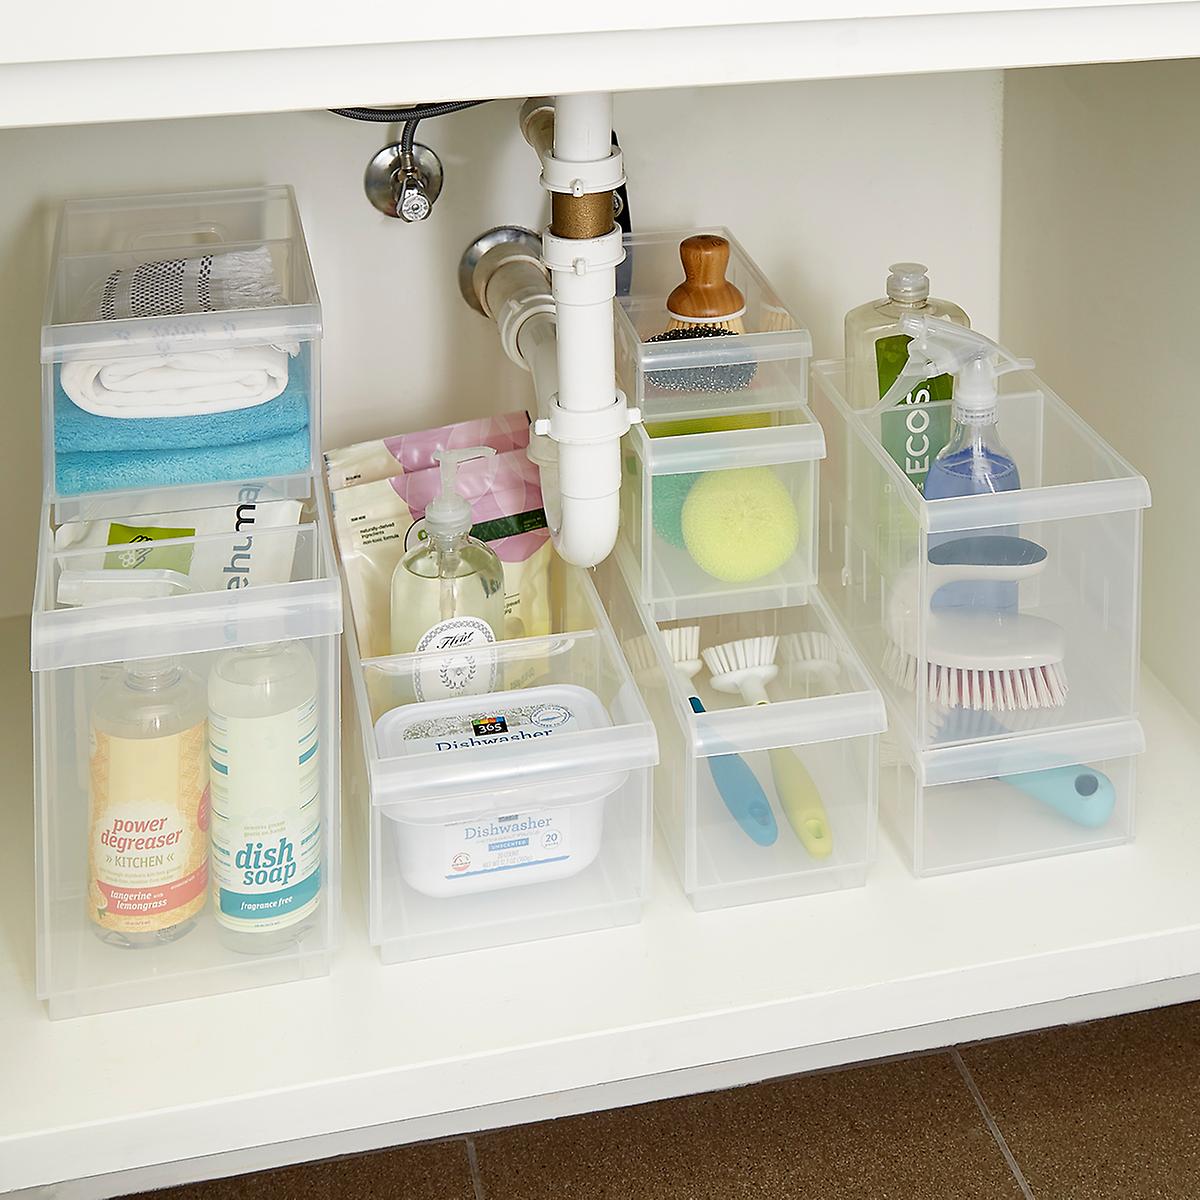 https://www.containerstore.com/catalogimages/345968/10074070-Clear-Stackable-Plastic-Sto.jpg